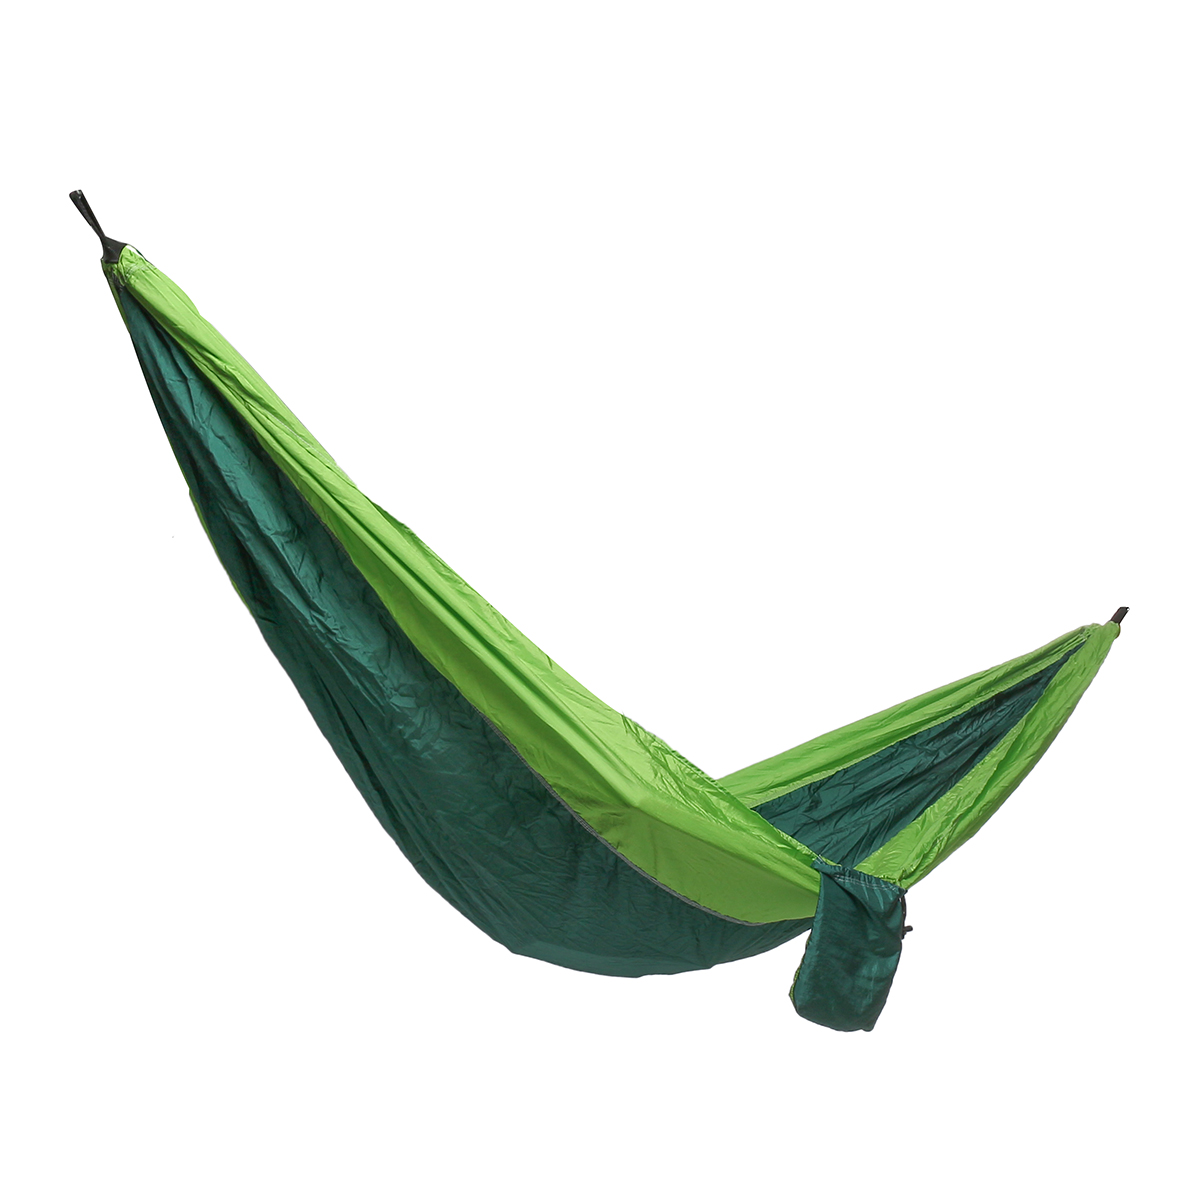 Camping Hammock,Portable 2 Person Double Hammock Nylon for Outdoor Camping Travel Hanging Bed Tent Garden Swing Set with Carrying Bag - image 2 of 5